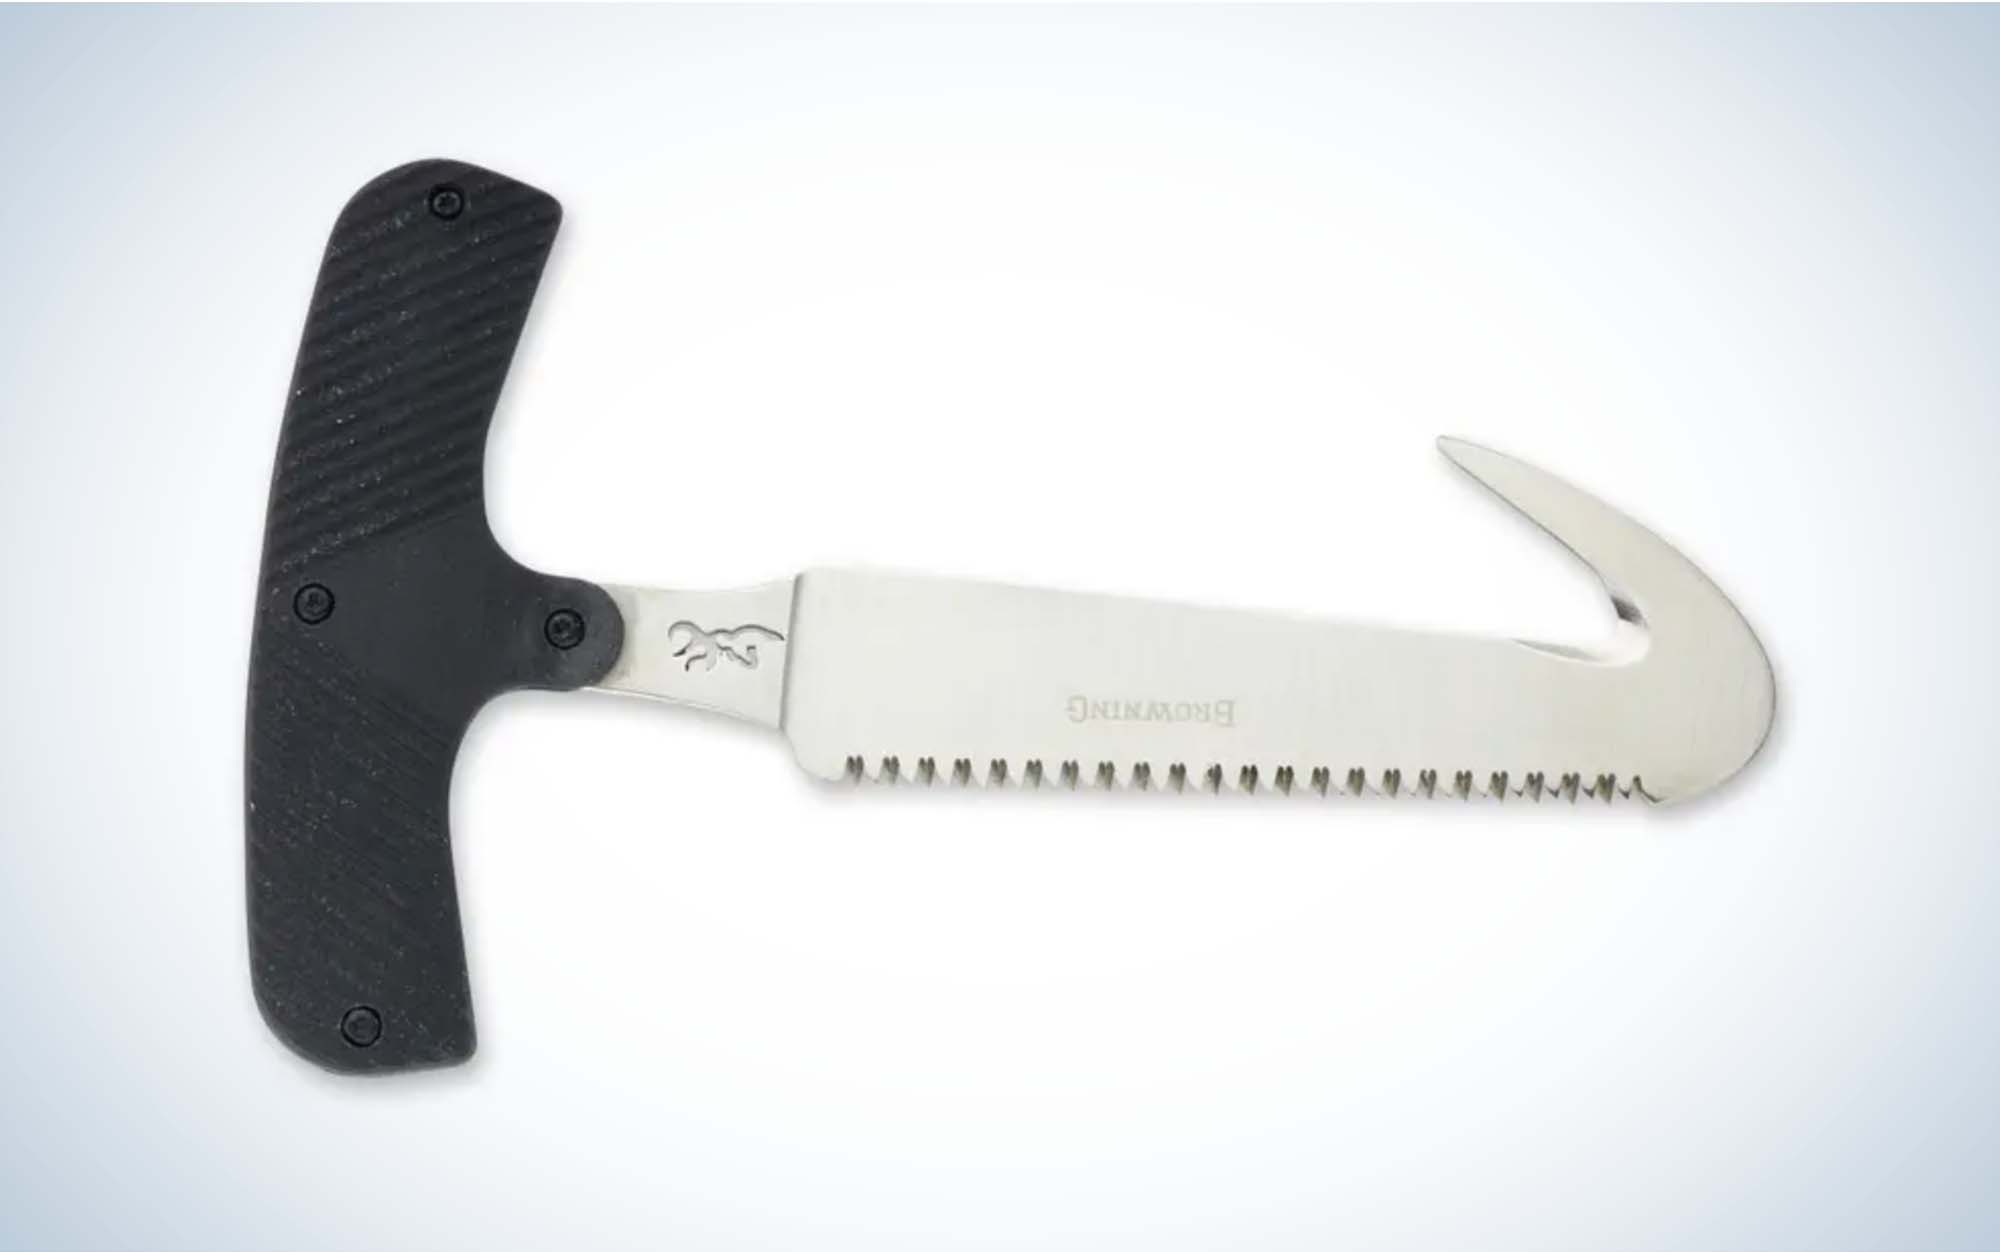 The best bone saw for field dressing.